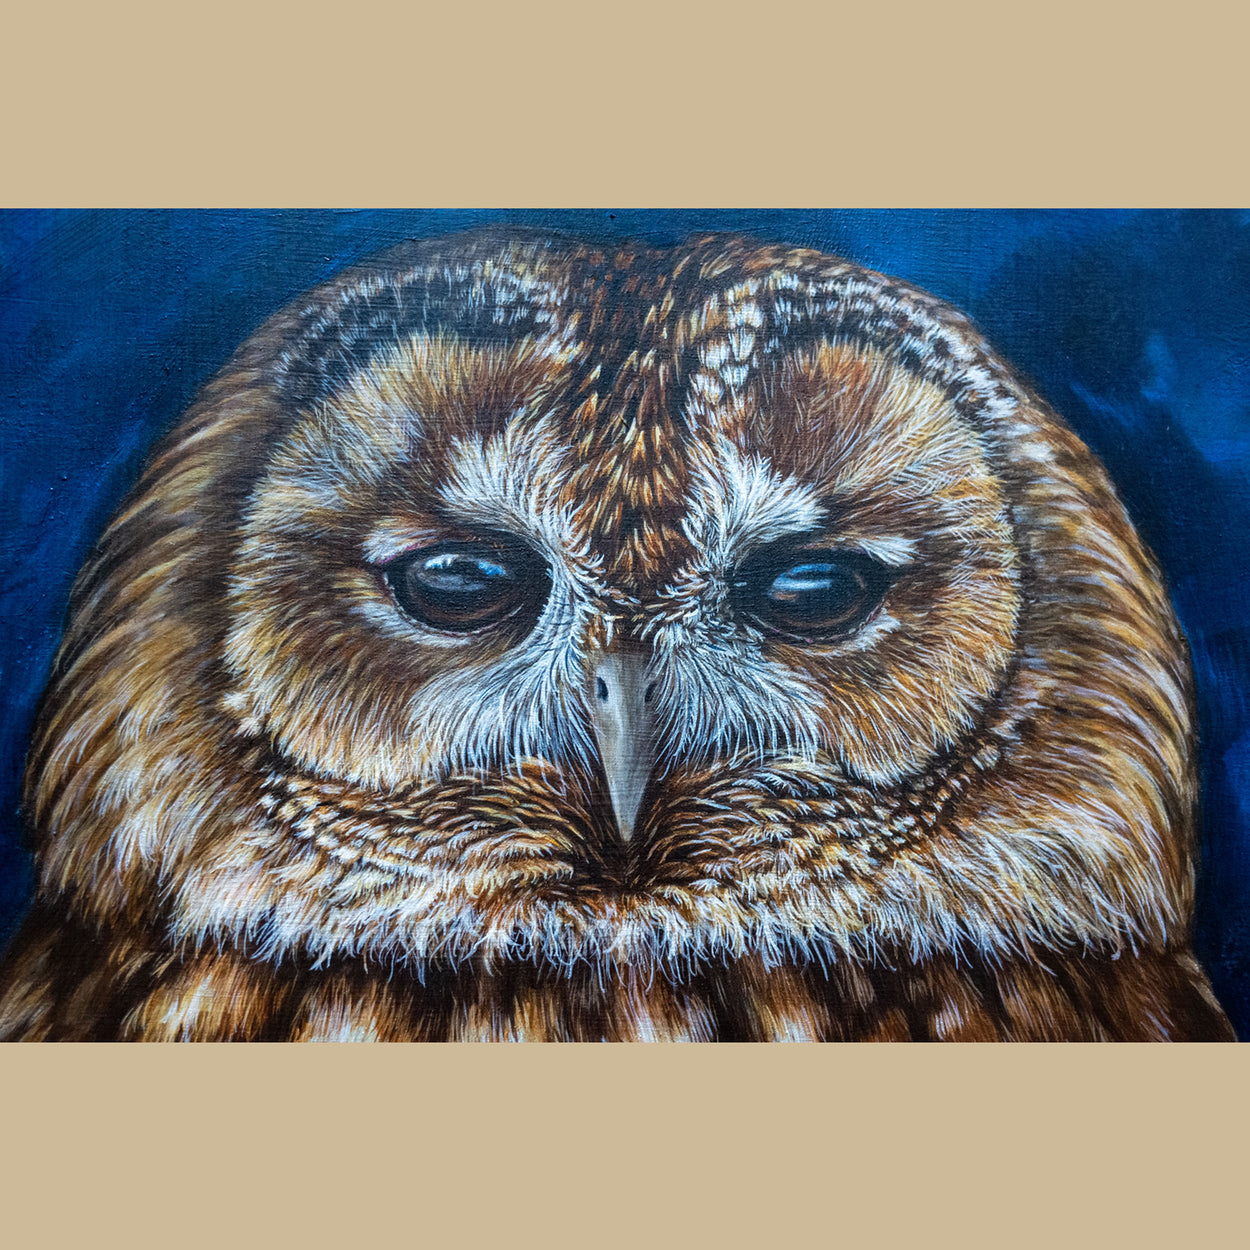 Tawny Owl Painting Closed-up 2 - Jill Dimond TheThrivingWild